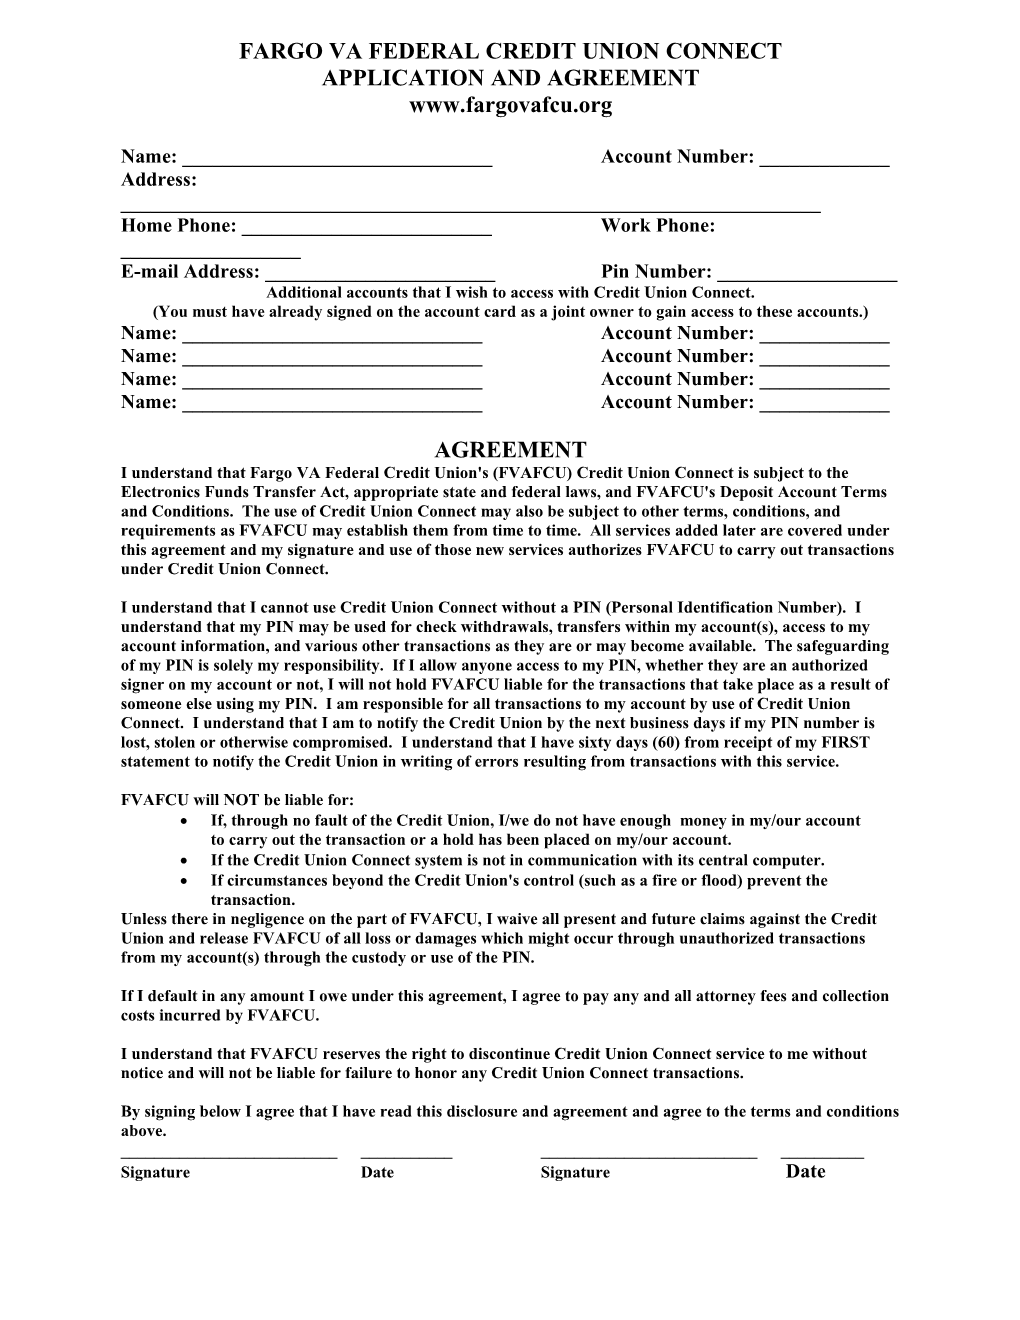 Credit Union Connect Application And Agreement